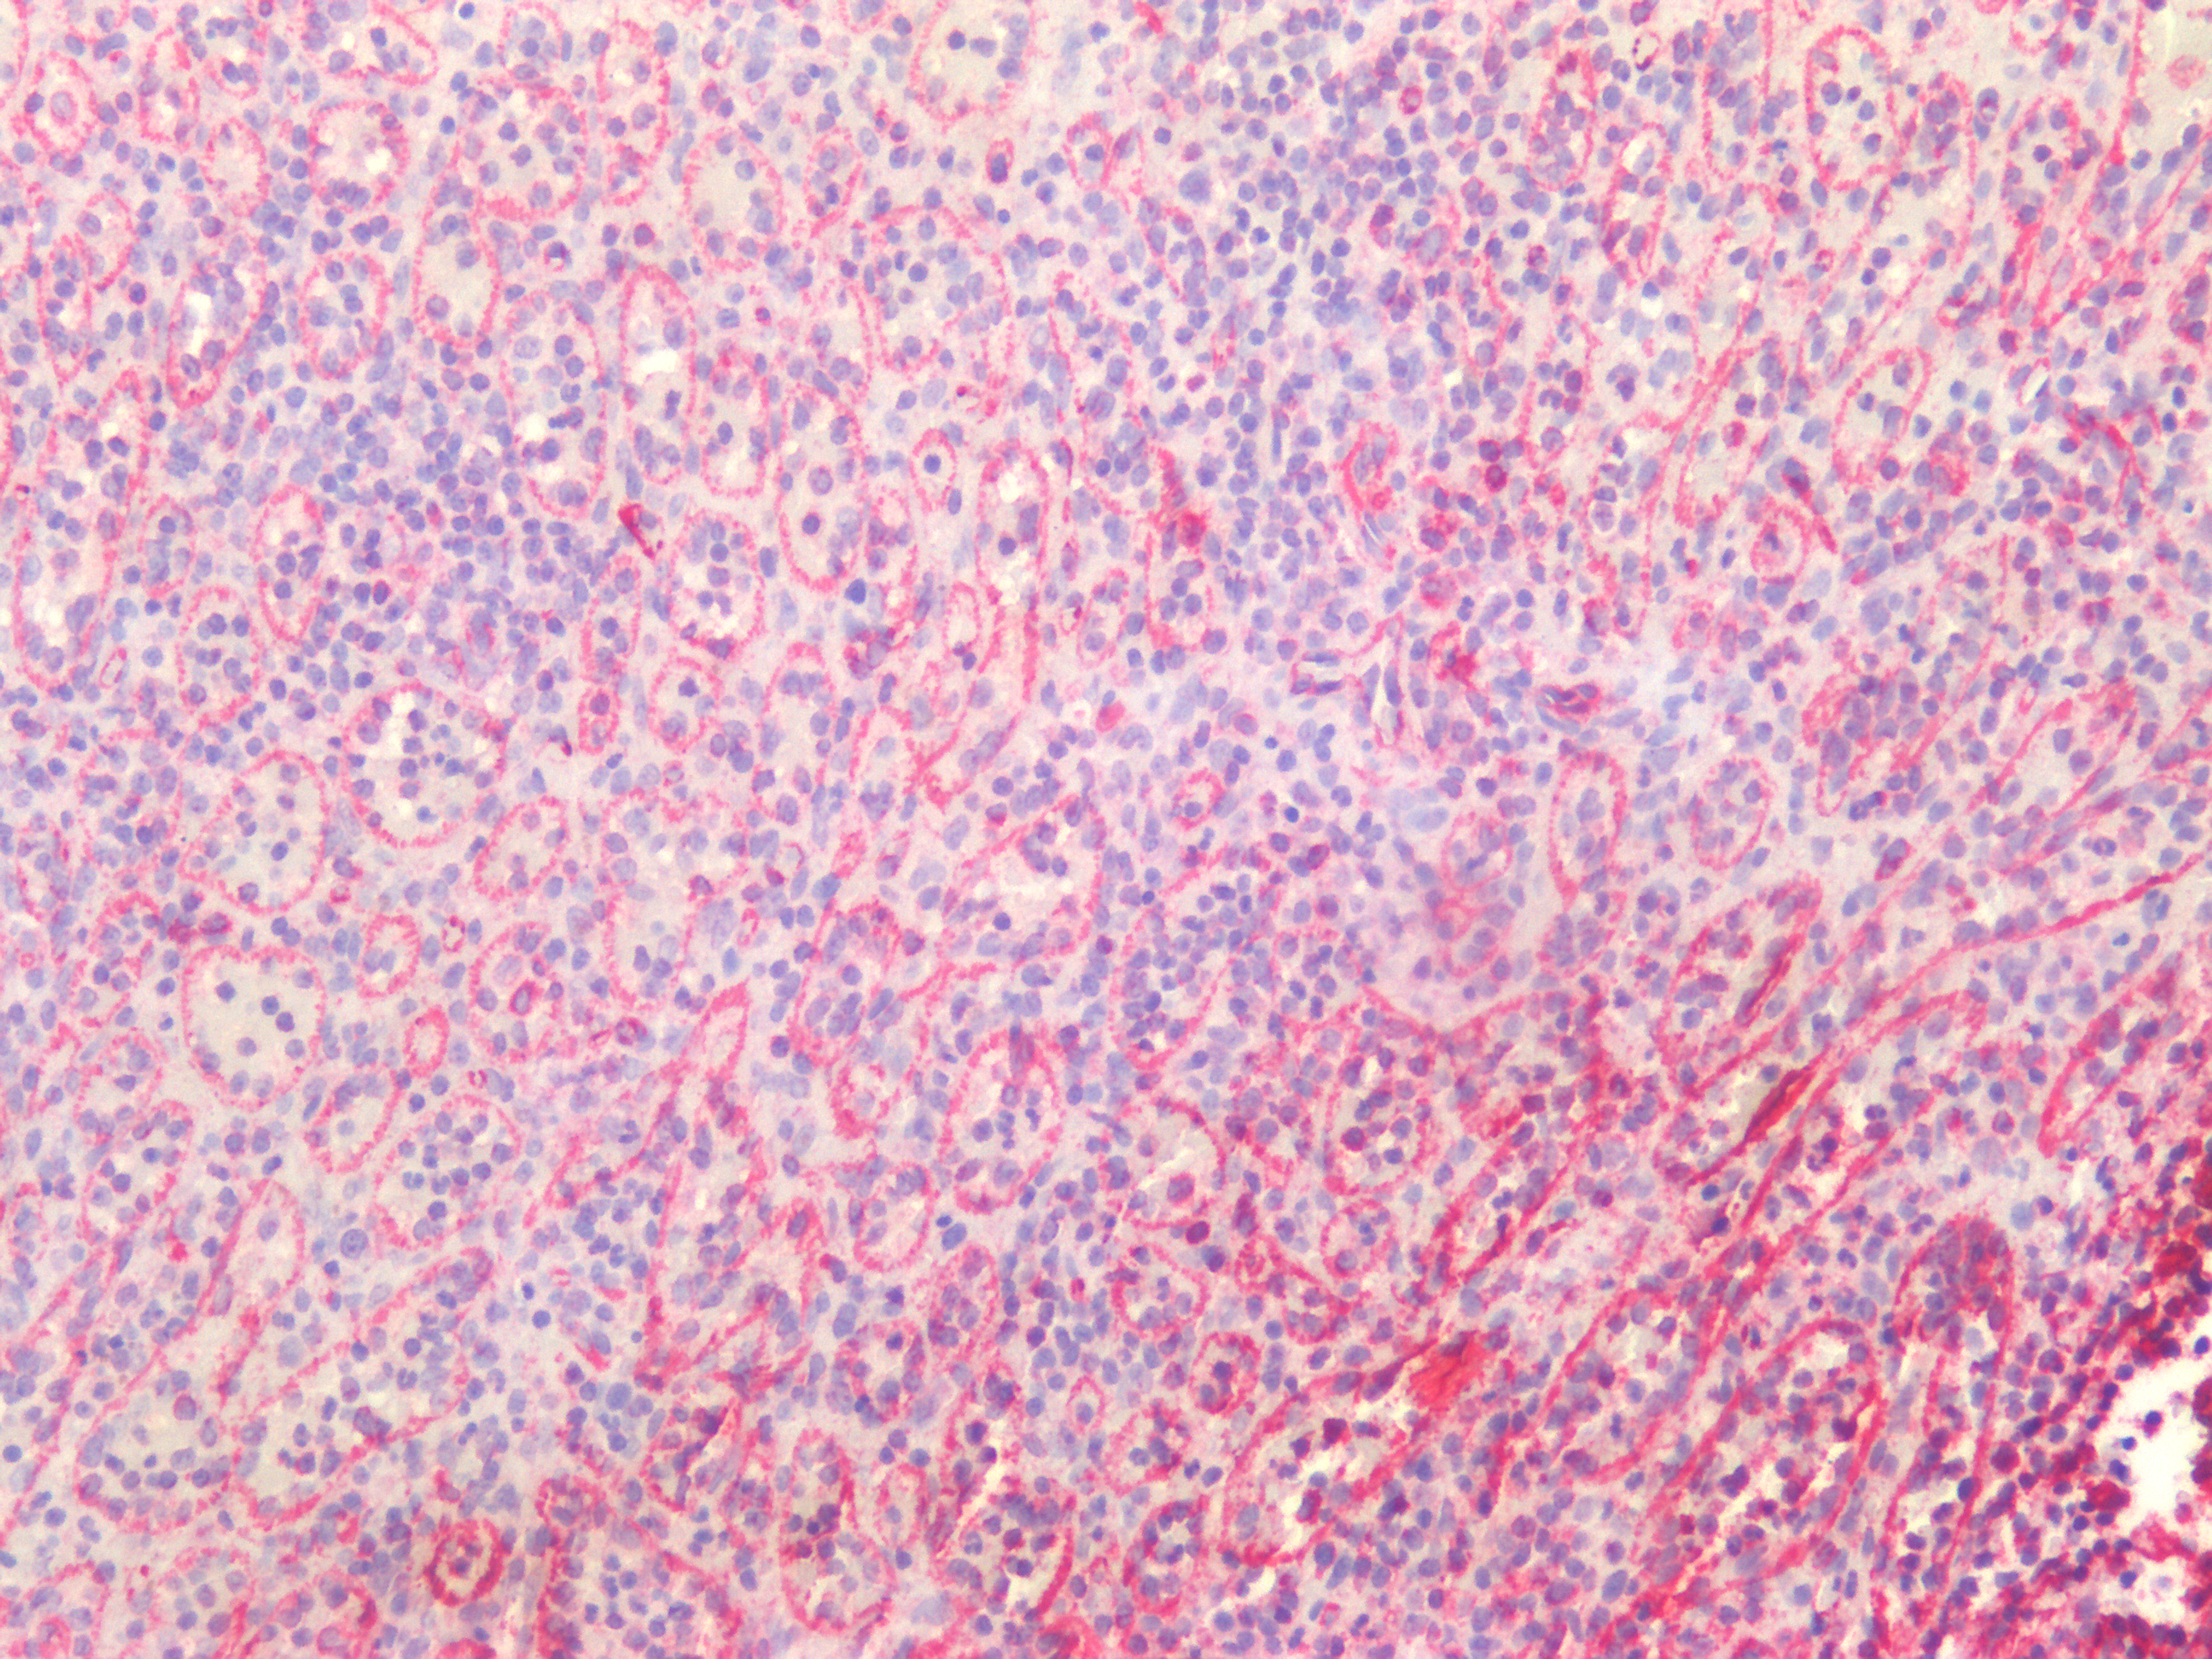 Figure 9. Immunostaining of human paraffin embedded tissue sections of human spleen with MUB1903P (diluted 1:100), showing the specific pattern of vimentin in the mesenchymal cell types.